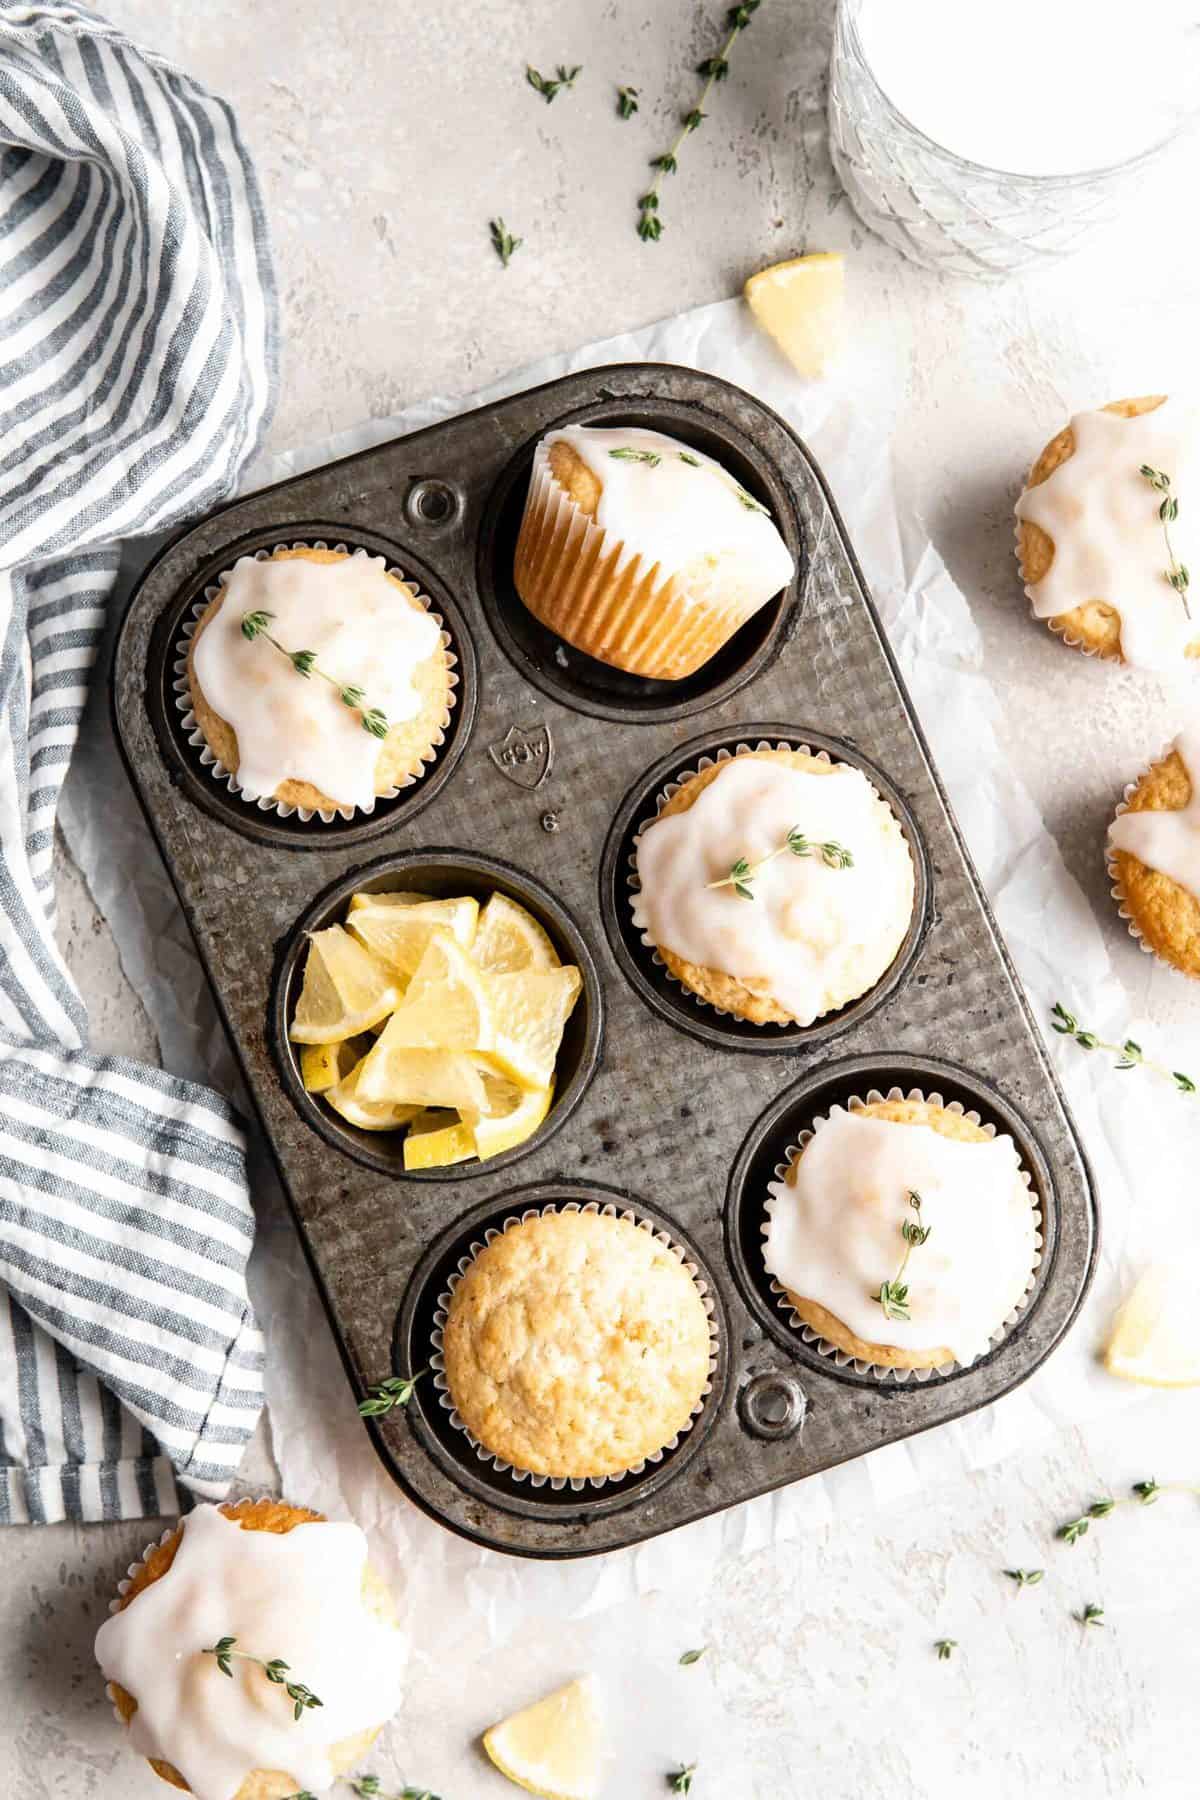 Lemon thyme muffins with glaze in a muffin tin.